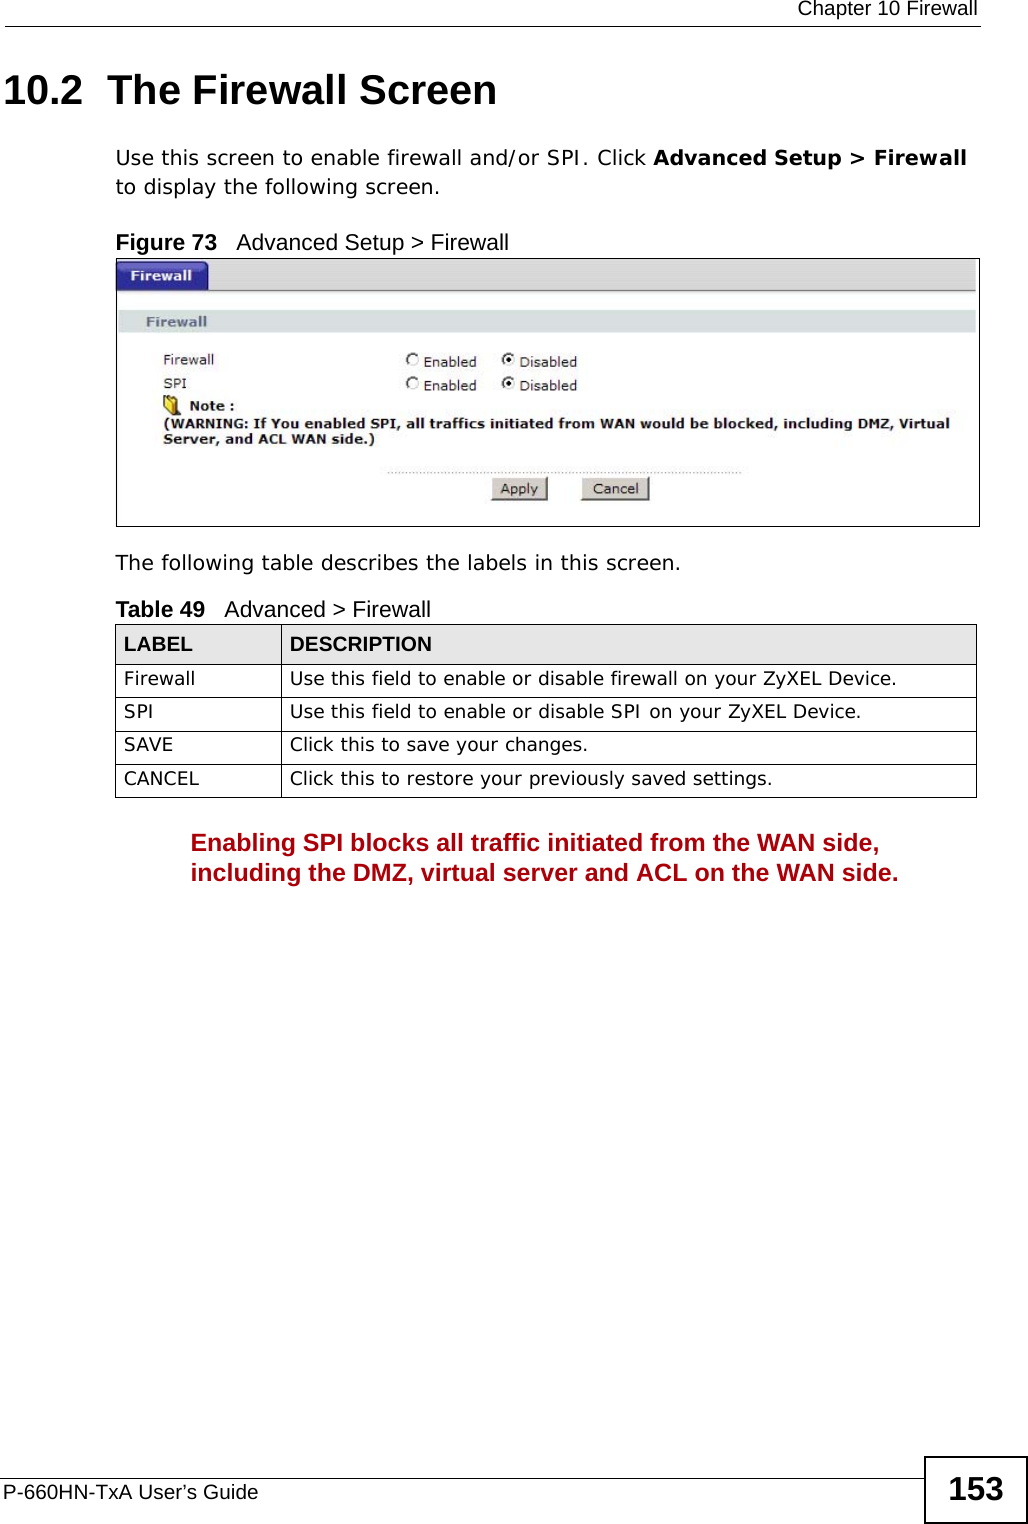  Chapter 10 FirewallP-660HN-TxA User’s Guide 15310.2  The Firewall ScreenUse this screen to enable firewall and/or SPI. Click Advanced Setup &gt; Firewall to display the following screen.Figure 73   Advanced Setup &gt; FirewallThe following table describes the labels in this screen.Enabling SPI blocks all traffic initiated from the WAN side, including the DMZ, virtual server and ACL on the WAN side.Table 49   Advanced &gt; FirewallLABEL DESCRIPTIONFirewall Use this field to enable or disable firewall on your ZyXEL Device.SPI Use this field to enable or disable SPI on your ZyXEL Device.SAVE Click this to save your changes.CANCEL Click this to restore your previously saved settings.